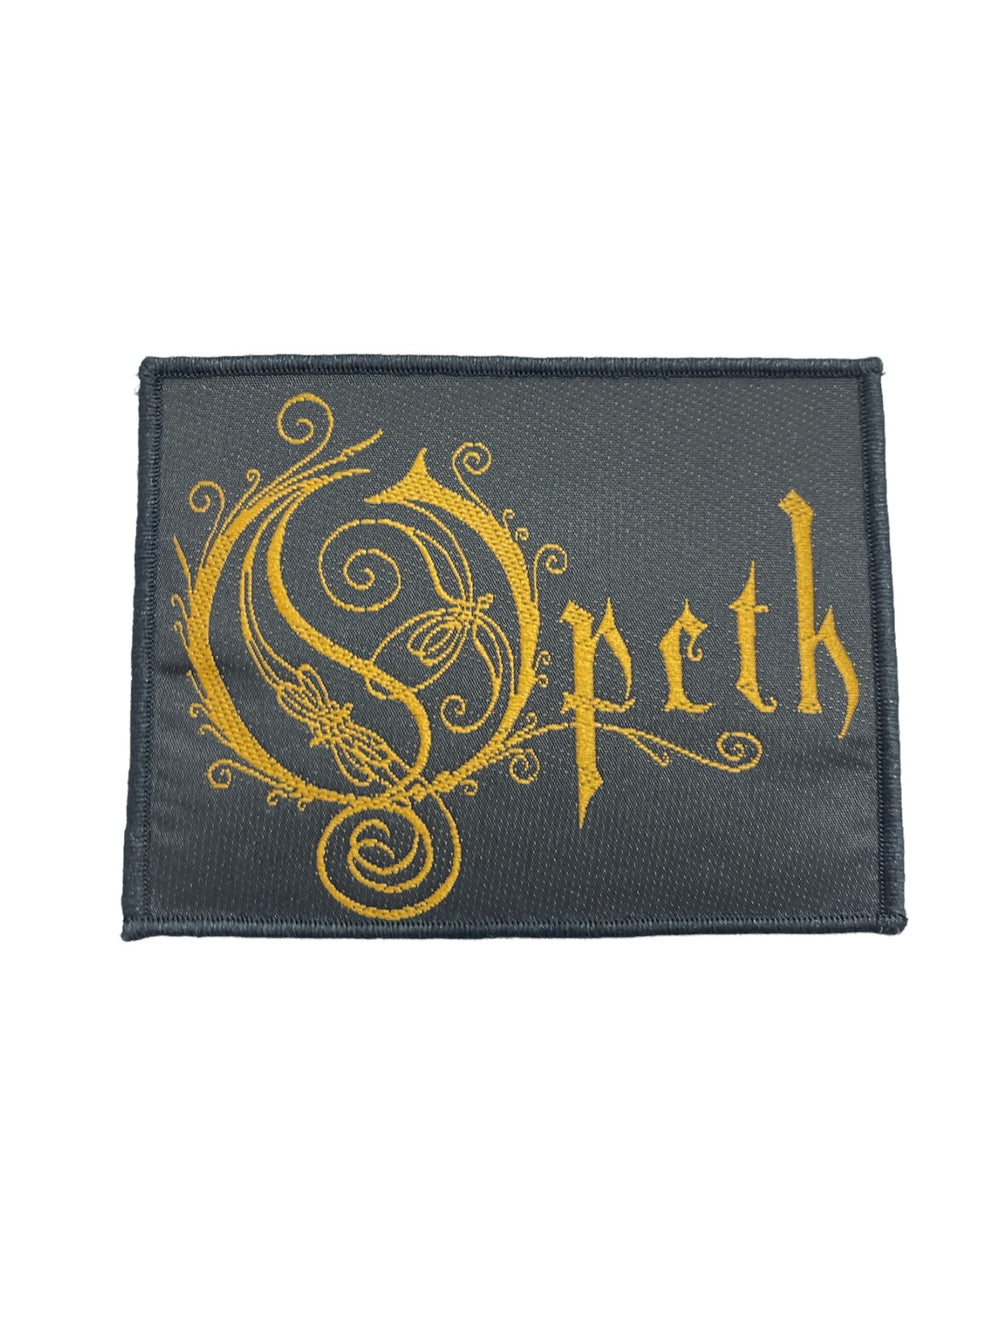 Opeth Logo Official Woven Patch Brand New